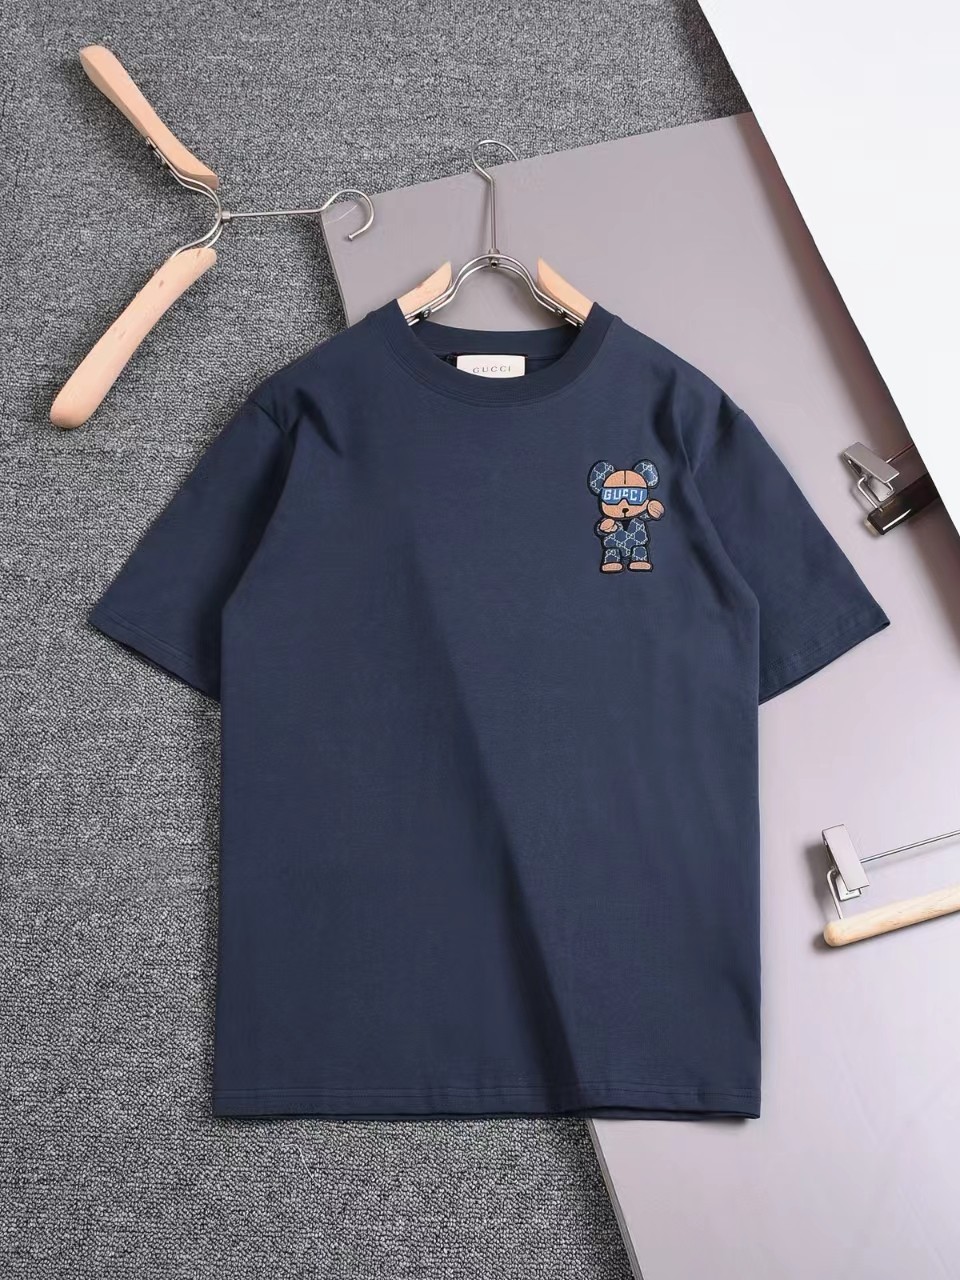 Gucci Clothing T-Shirt Apricot Color Beige Black Blue Khaki White Embroidery Unisex Combed Cotton Spring/Summer Collection